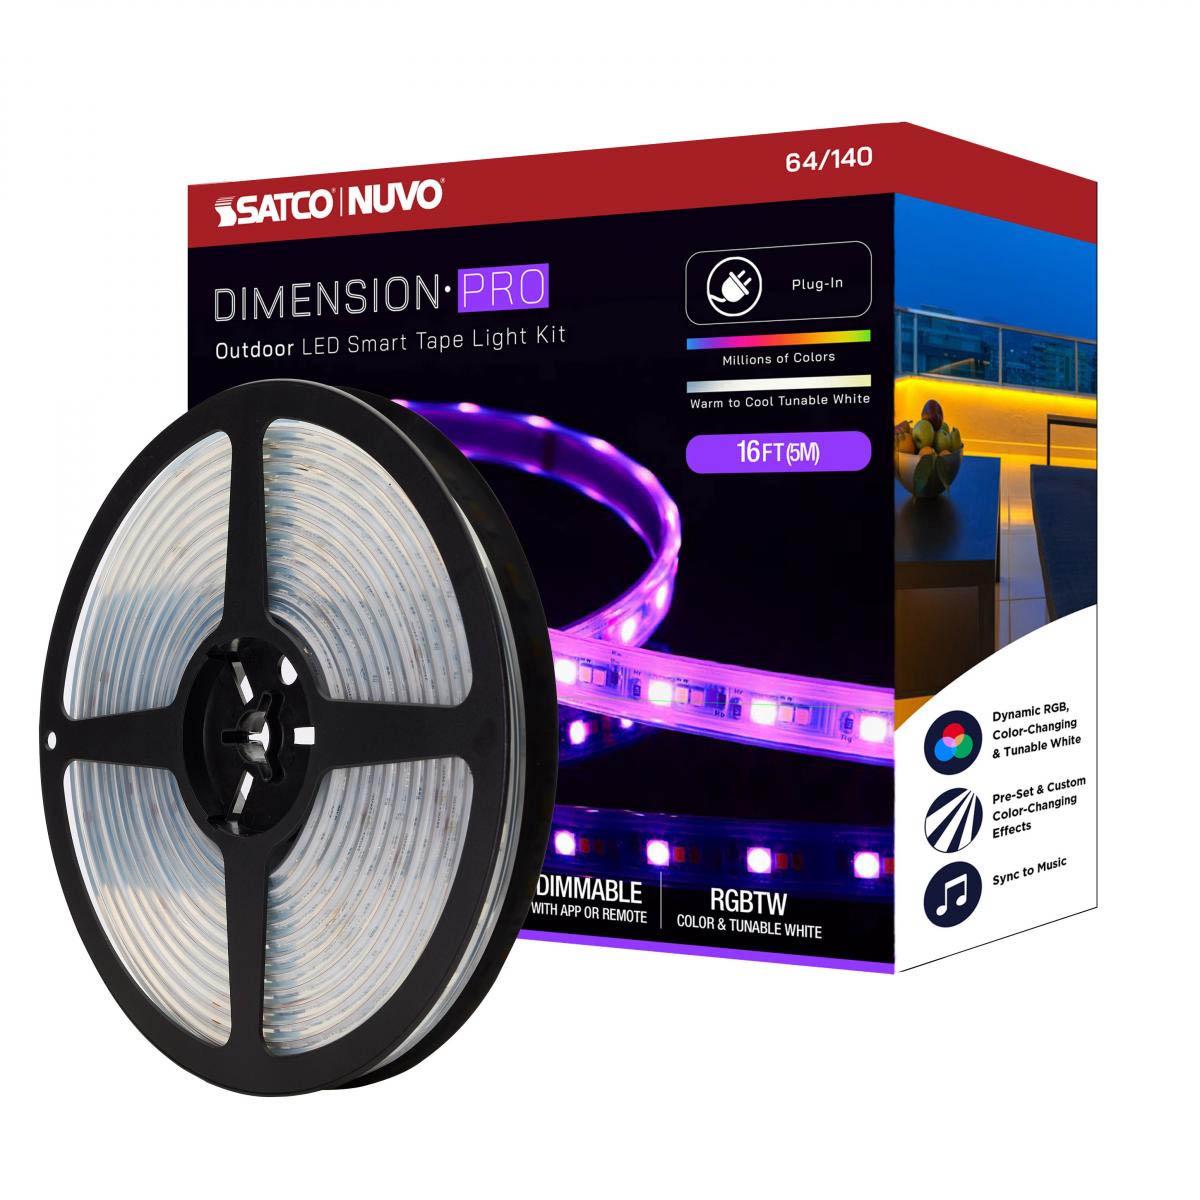 Dimension Pro Outdoor Smart LED Tape Light Kit with Remote, 16ft Reel, Color Changing RGB and Tunable White, 24V, Plug Connection - Bees Lighting